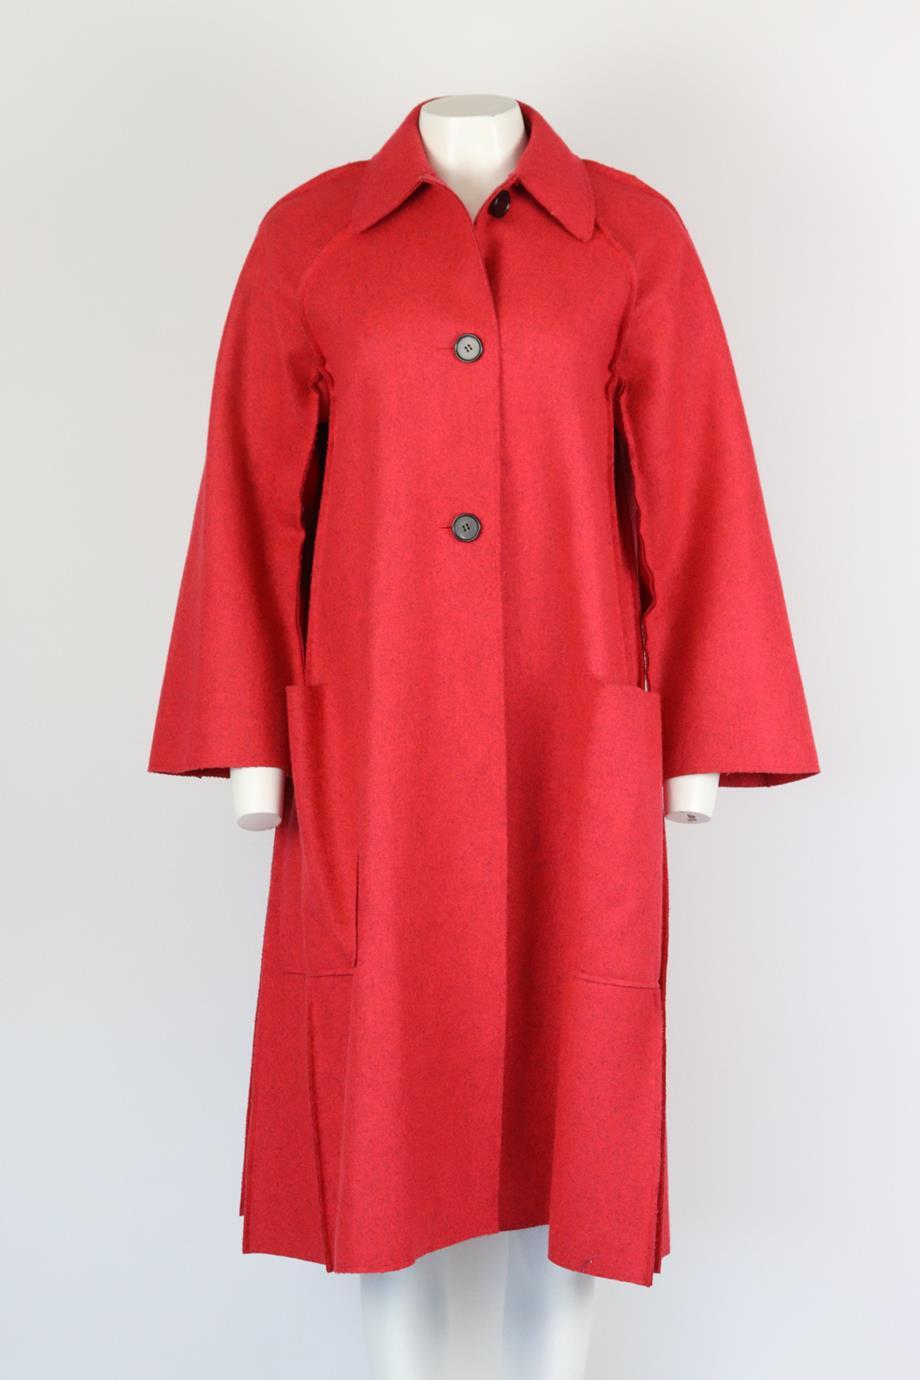 Christian Dior oversized wool coat. Red. Long sleeve, crewneck. Button fastening at front. 100% Wool. Size: FR 34 (UK 6, US 2, IT 38) Shoulder to shoulder: 16 in. Bust: 38 in. Waist: 50 in. Hips: 60 in. Length: 45 in. Very good condition - No sign